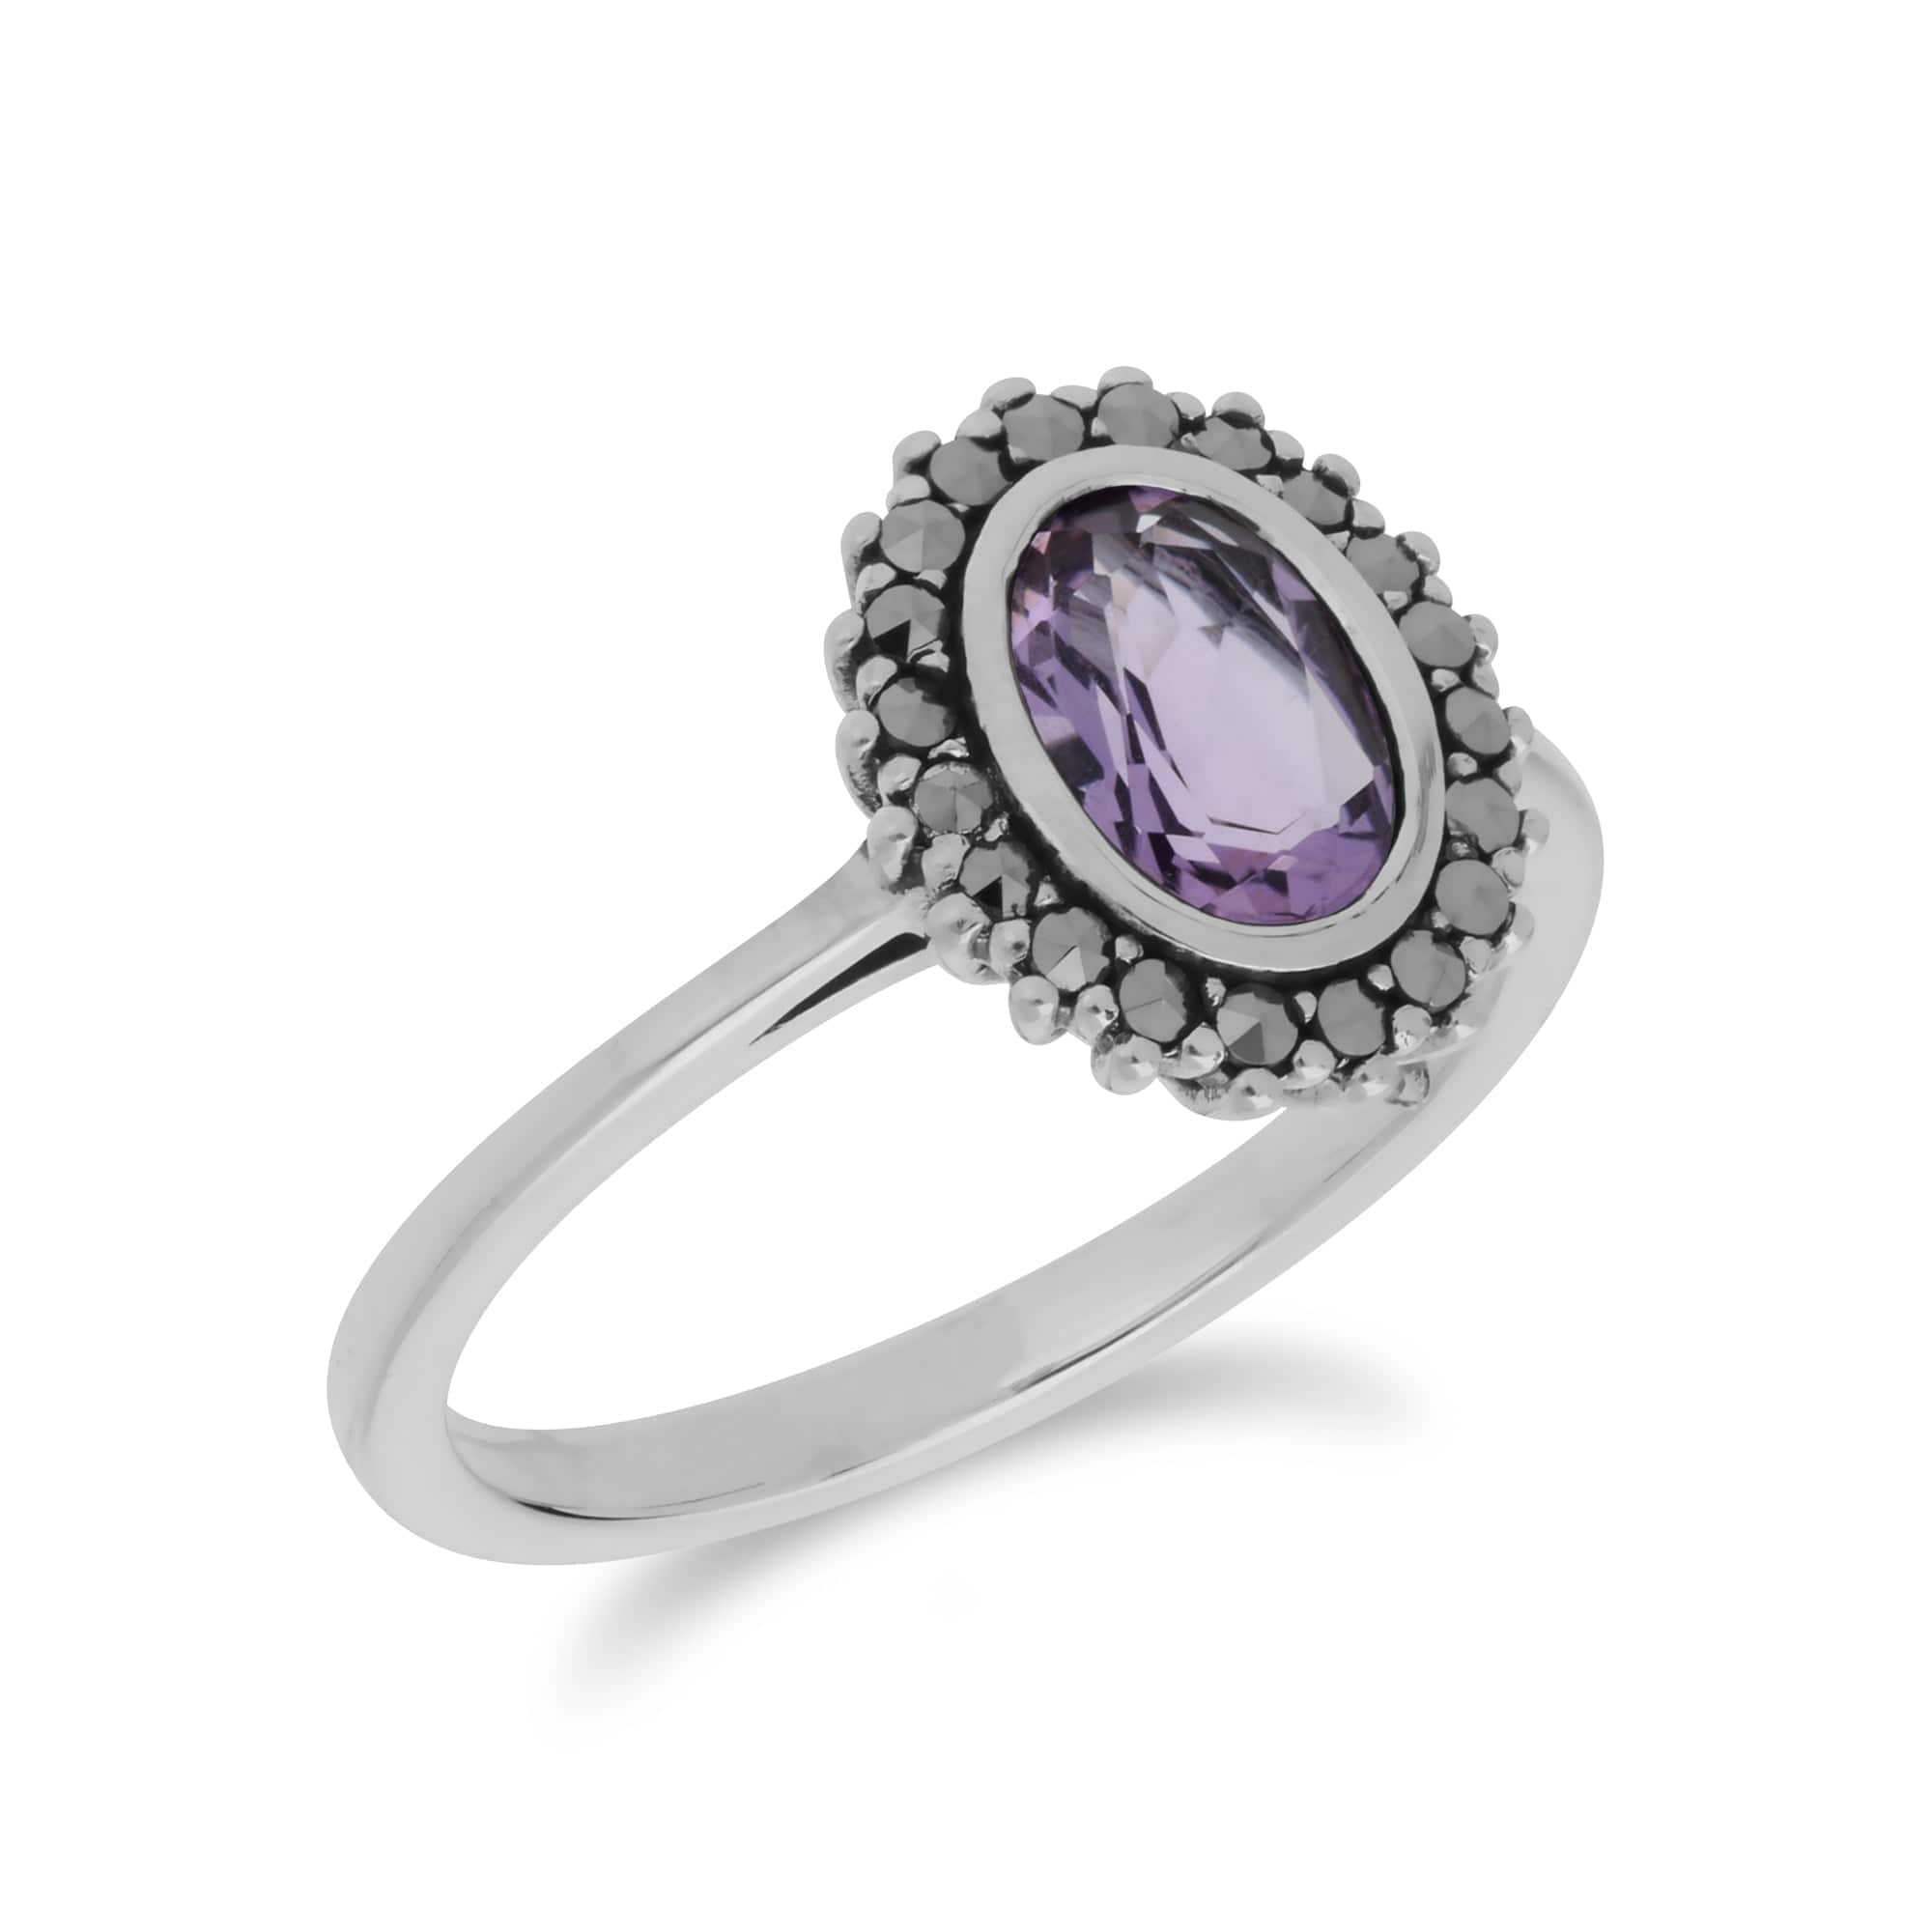 Art Deco Style Oval Amethyst & Marcasite Halo Ring in 925 Sterling Silver - Gemondo